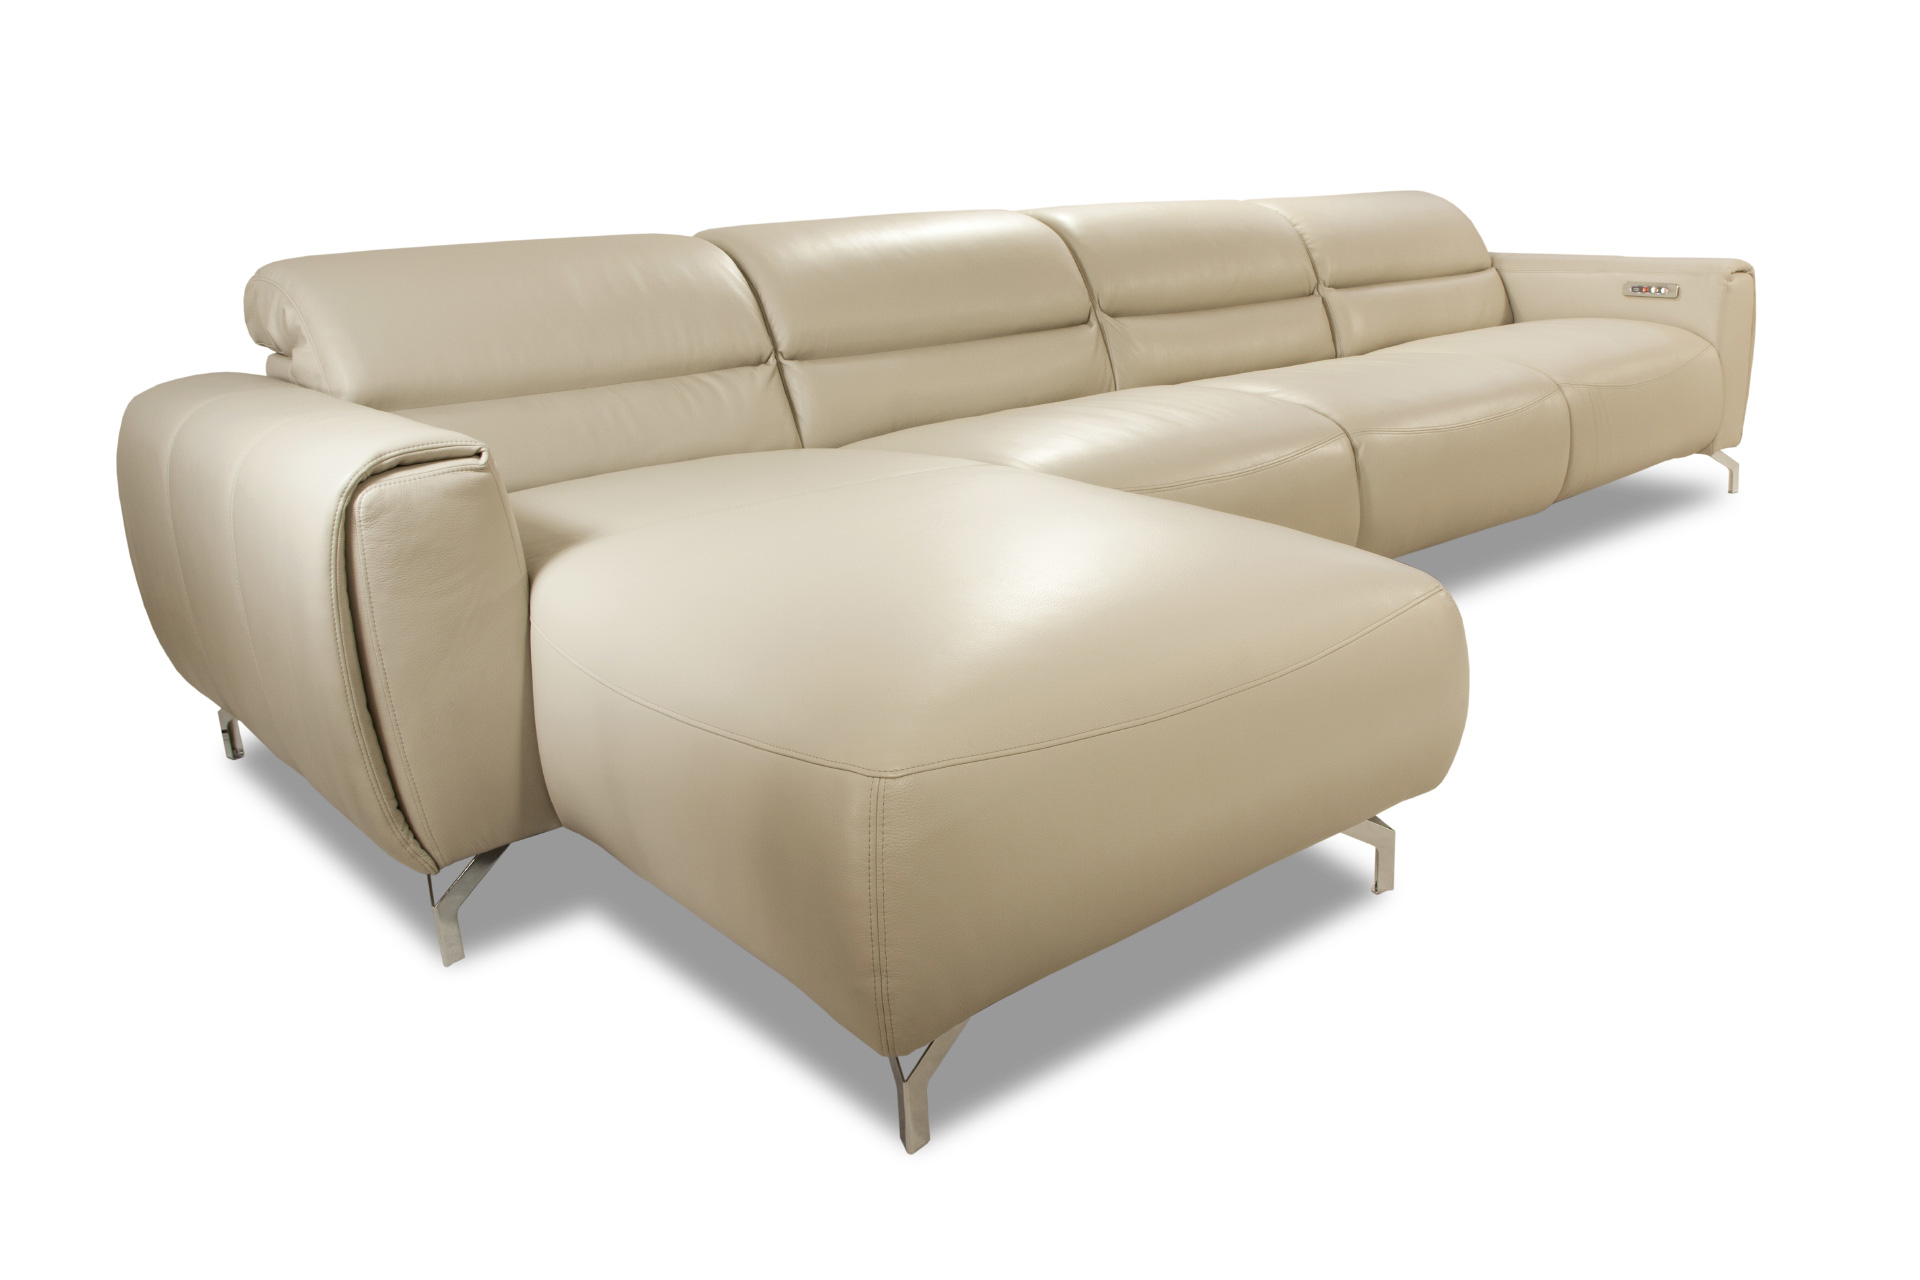 MOVE lounge suite beautiful original shape and many spectacular details